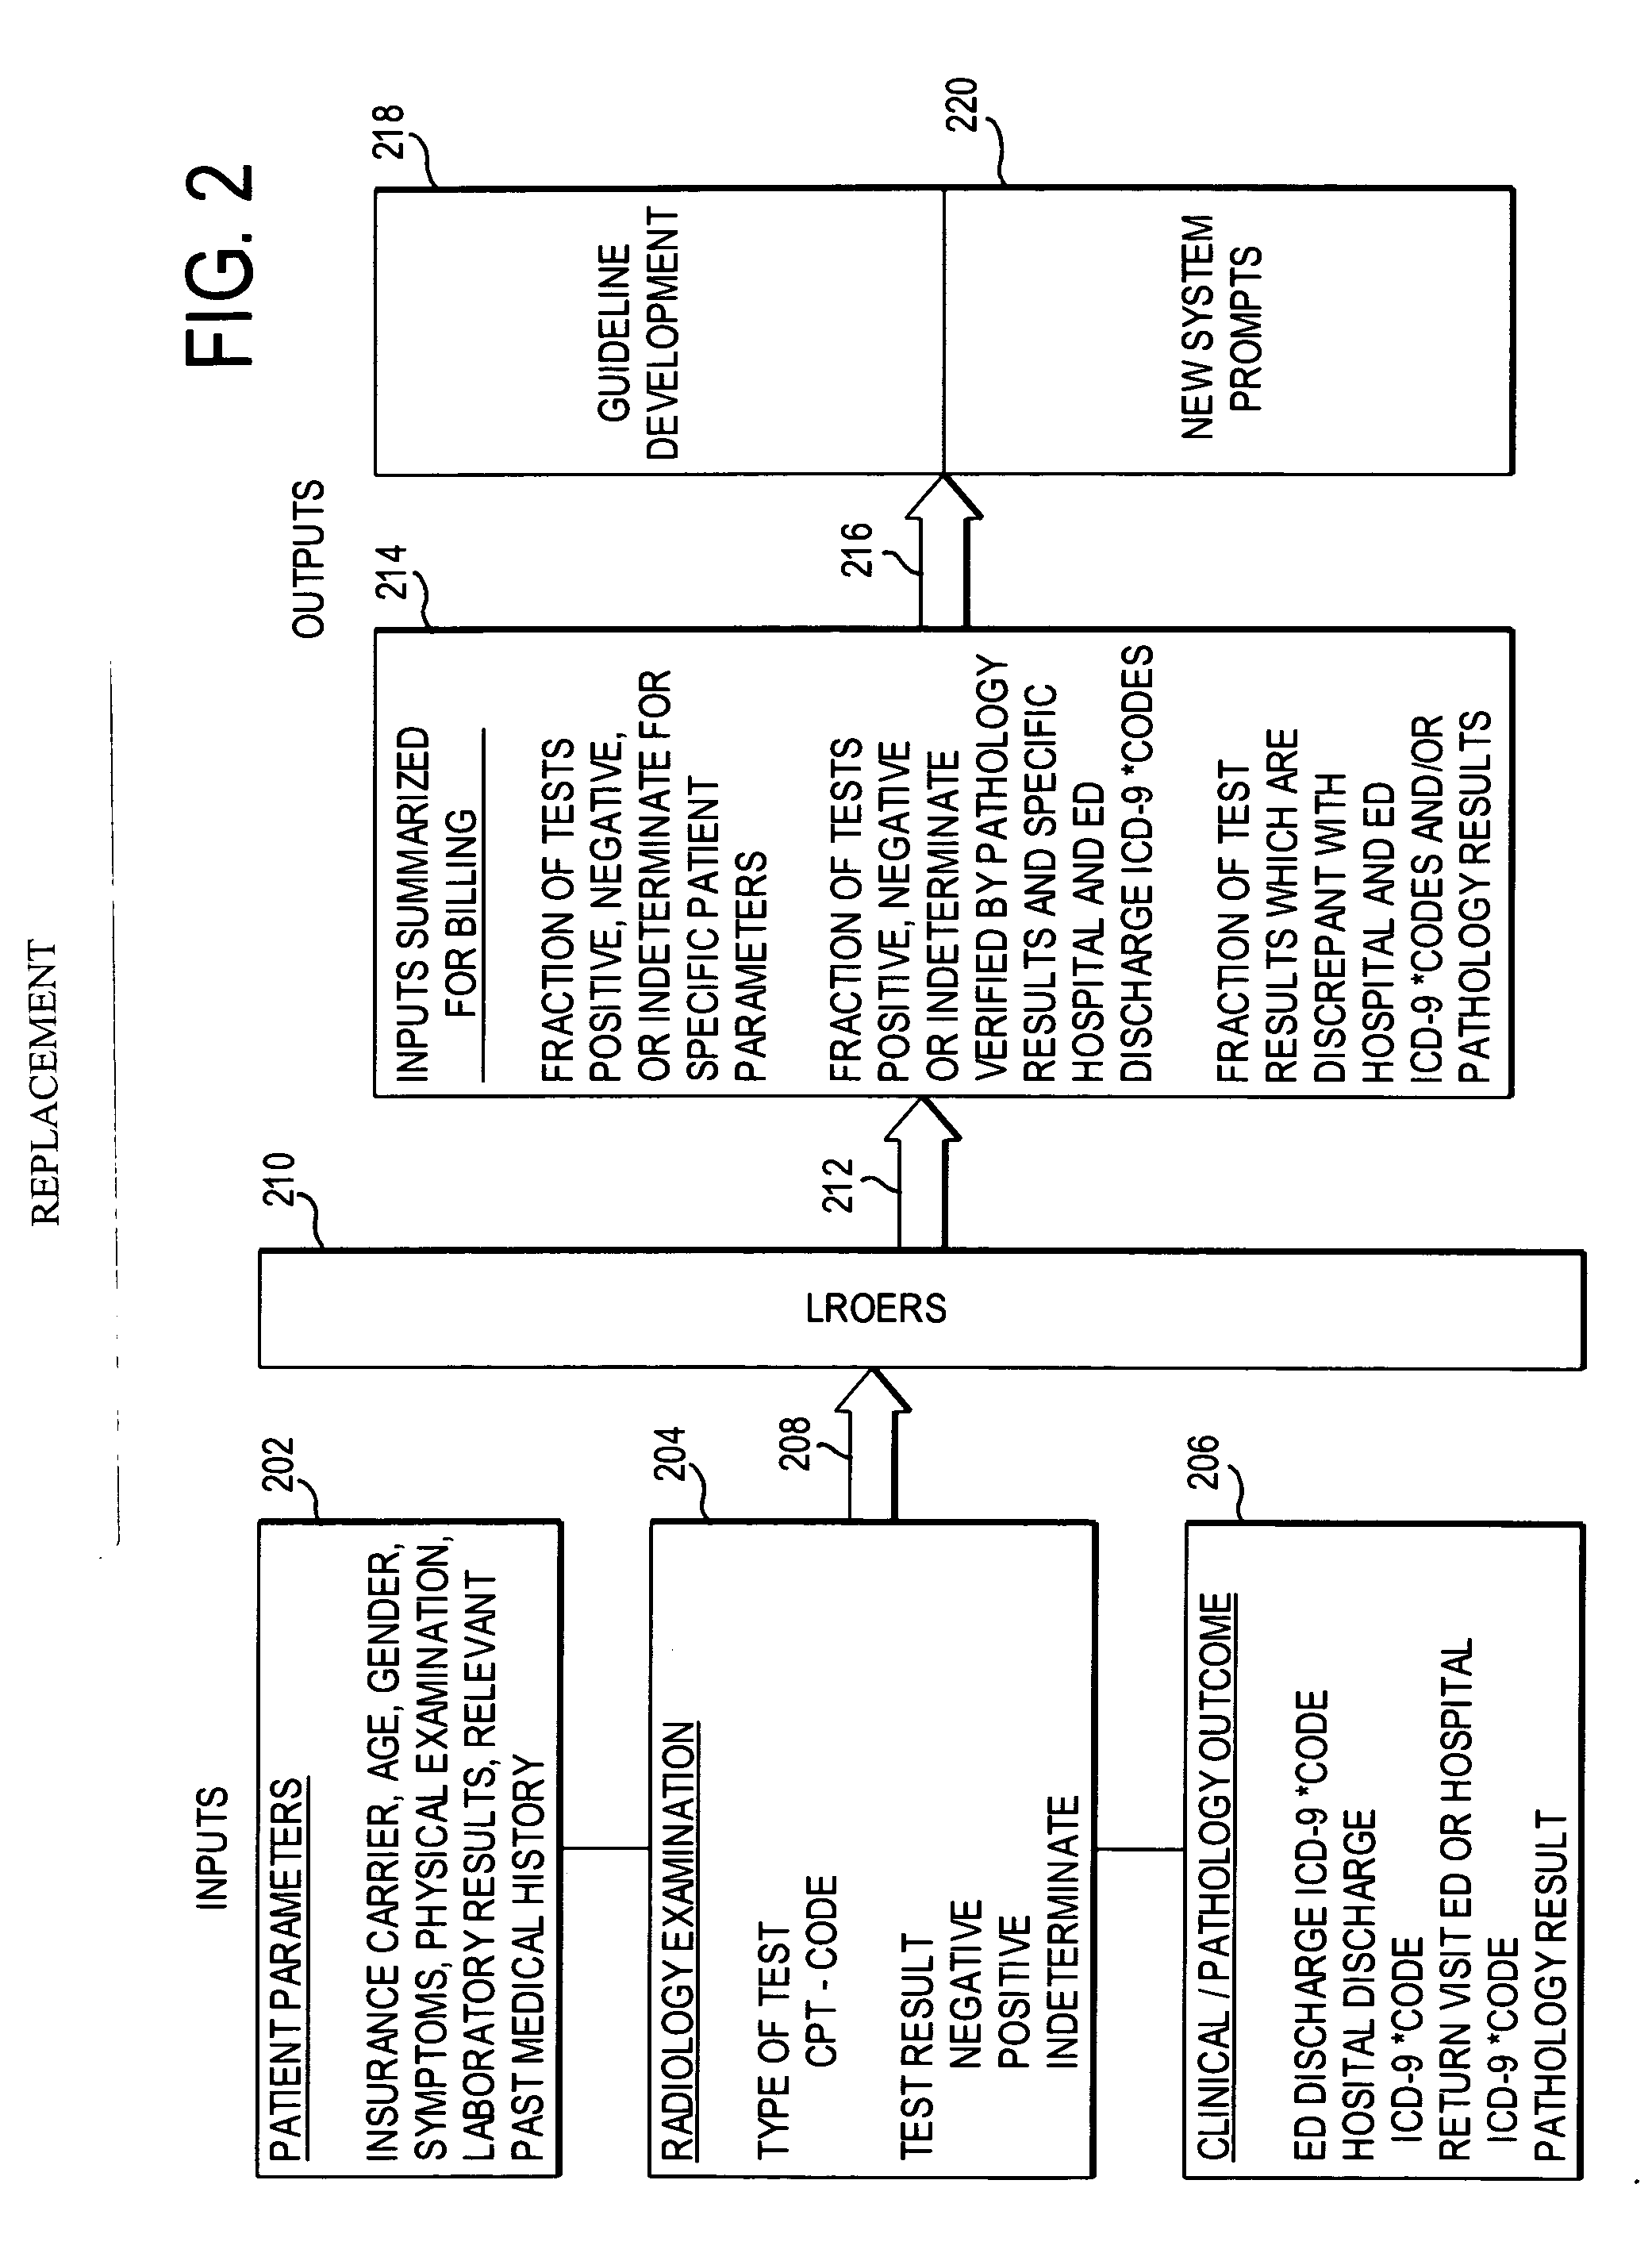 Radiology order entry and reporting system